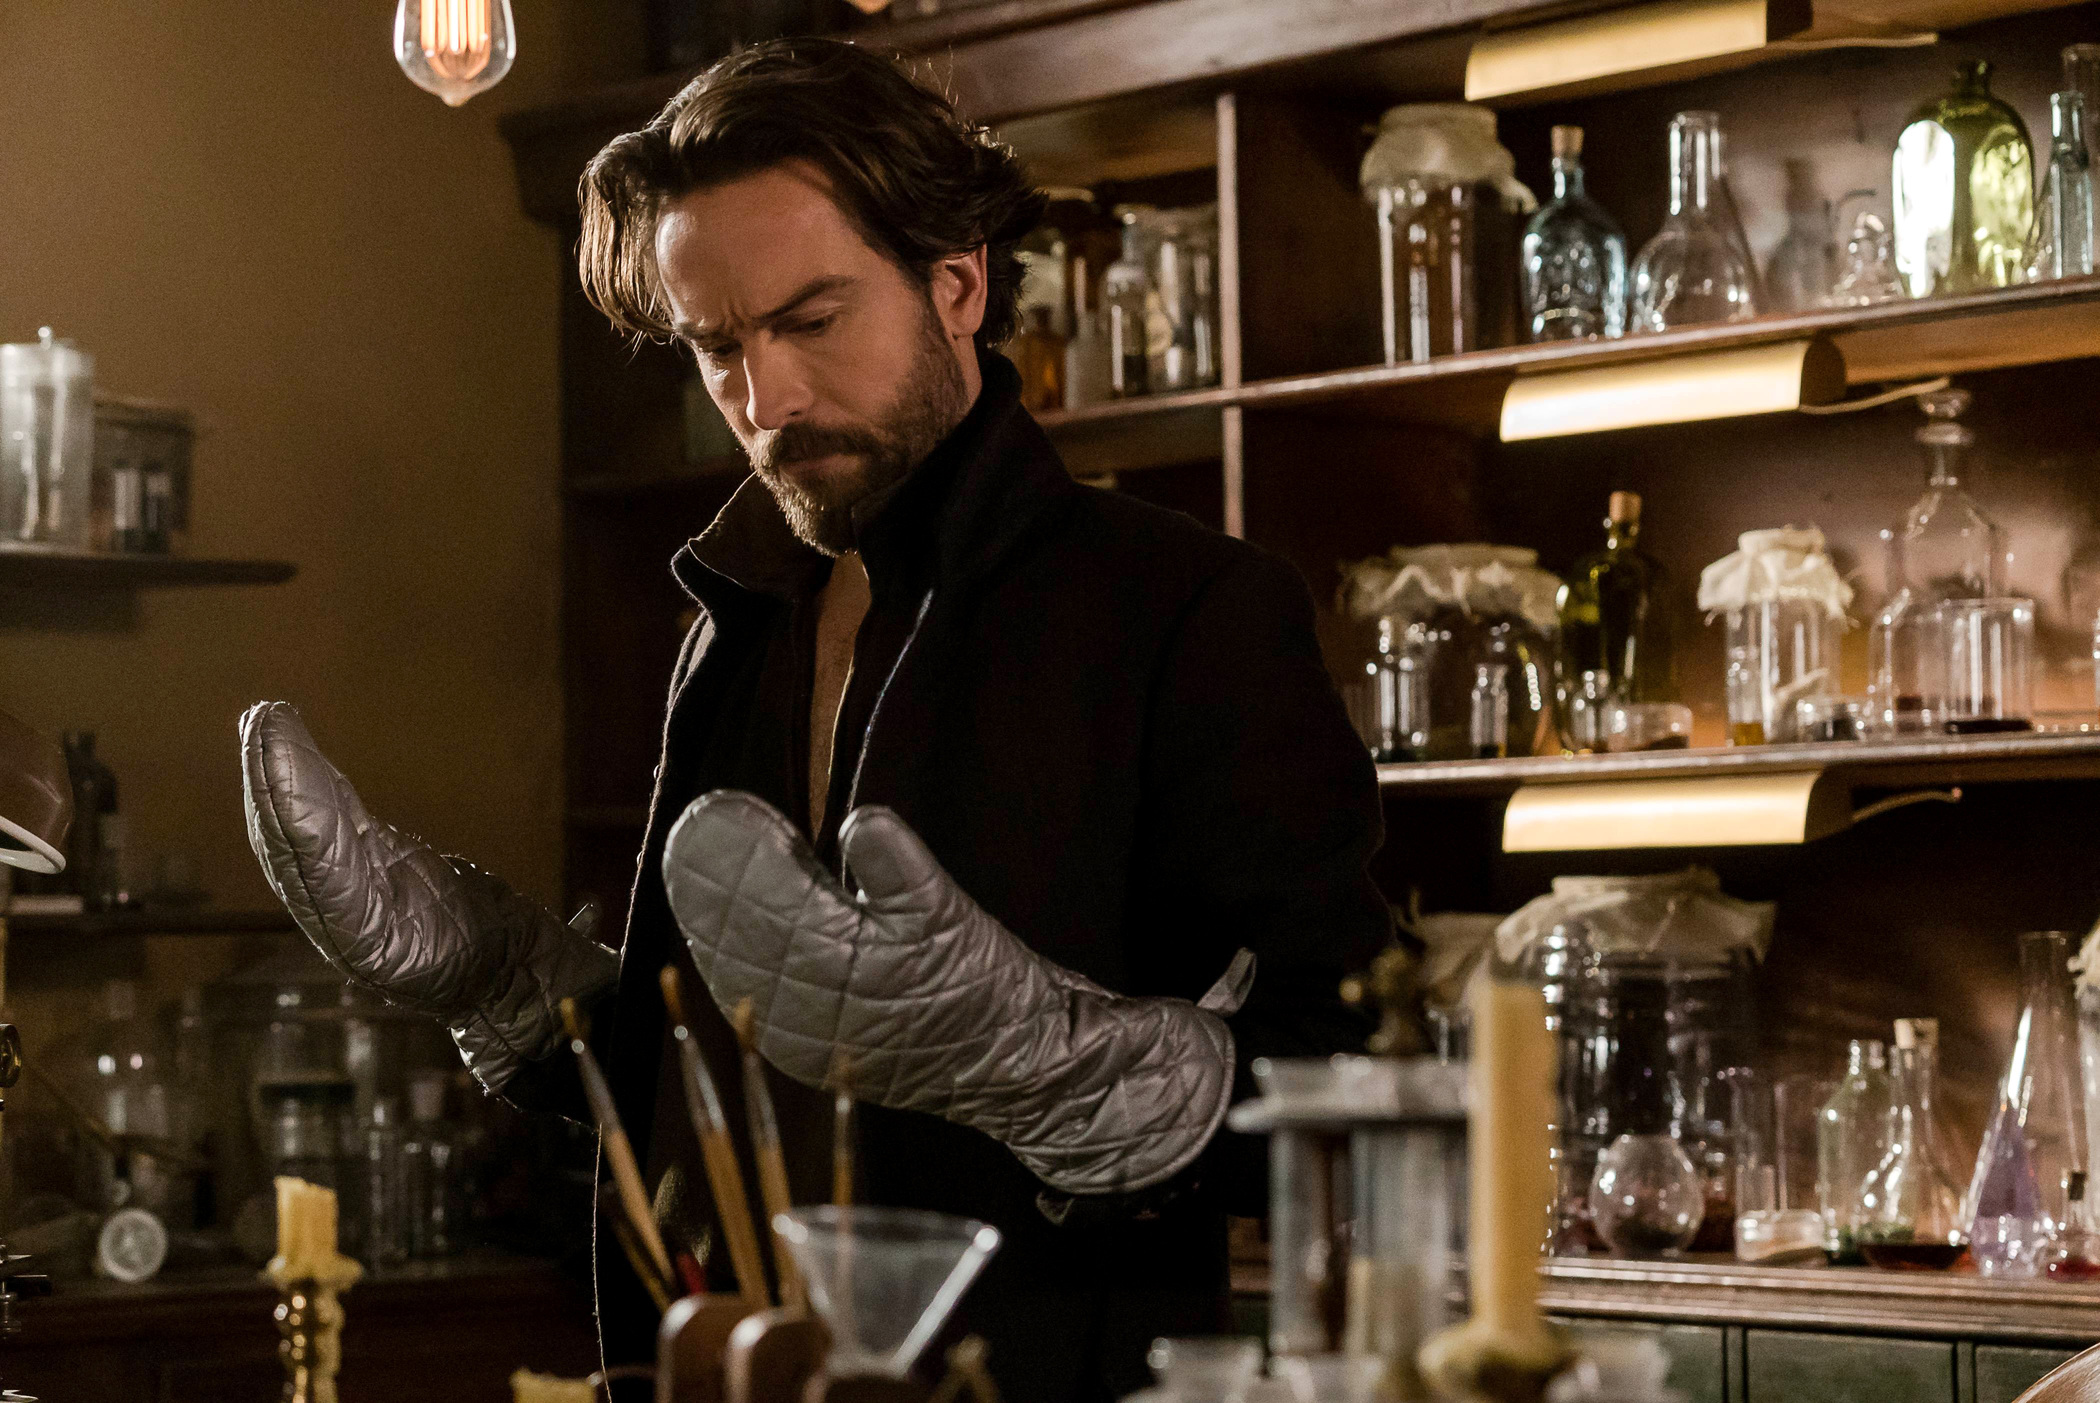 SLEEPY HOLLOW: Tom Mison in the "Incommunicado" episode of SLEEPY HOLLOW airing Friday, March 18 (8:00-9:00 PM ET/PT) on FOX. ©2016 Fox Broadcasting Co. Cr: Tina Rowden/FOX